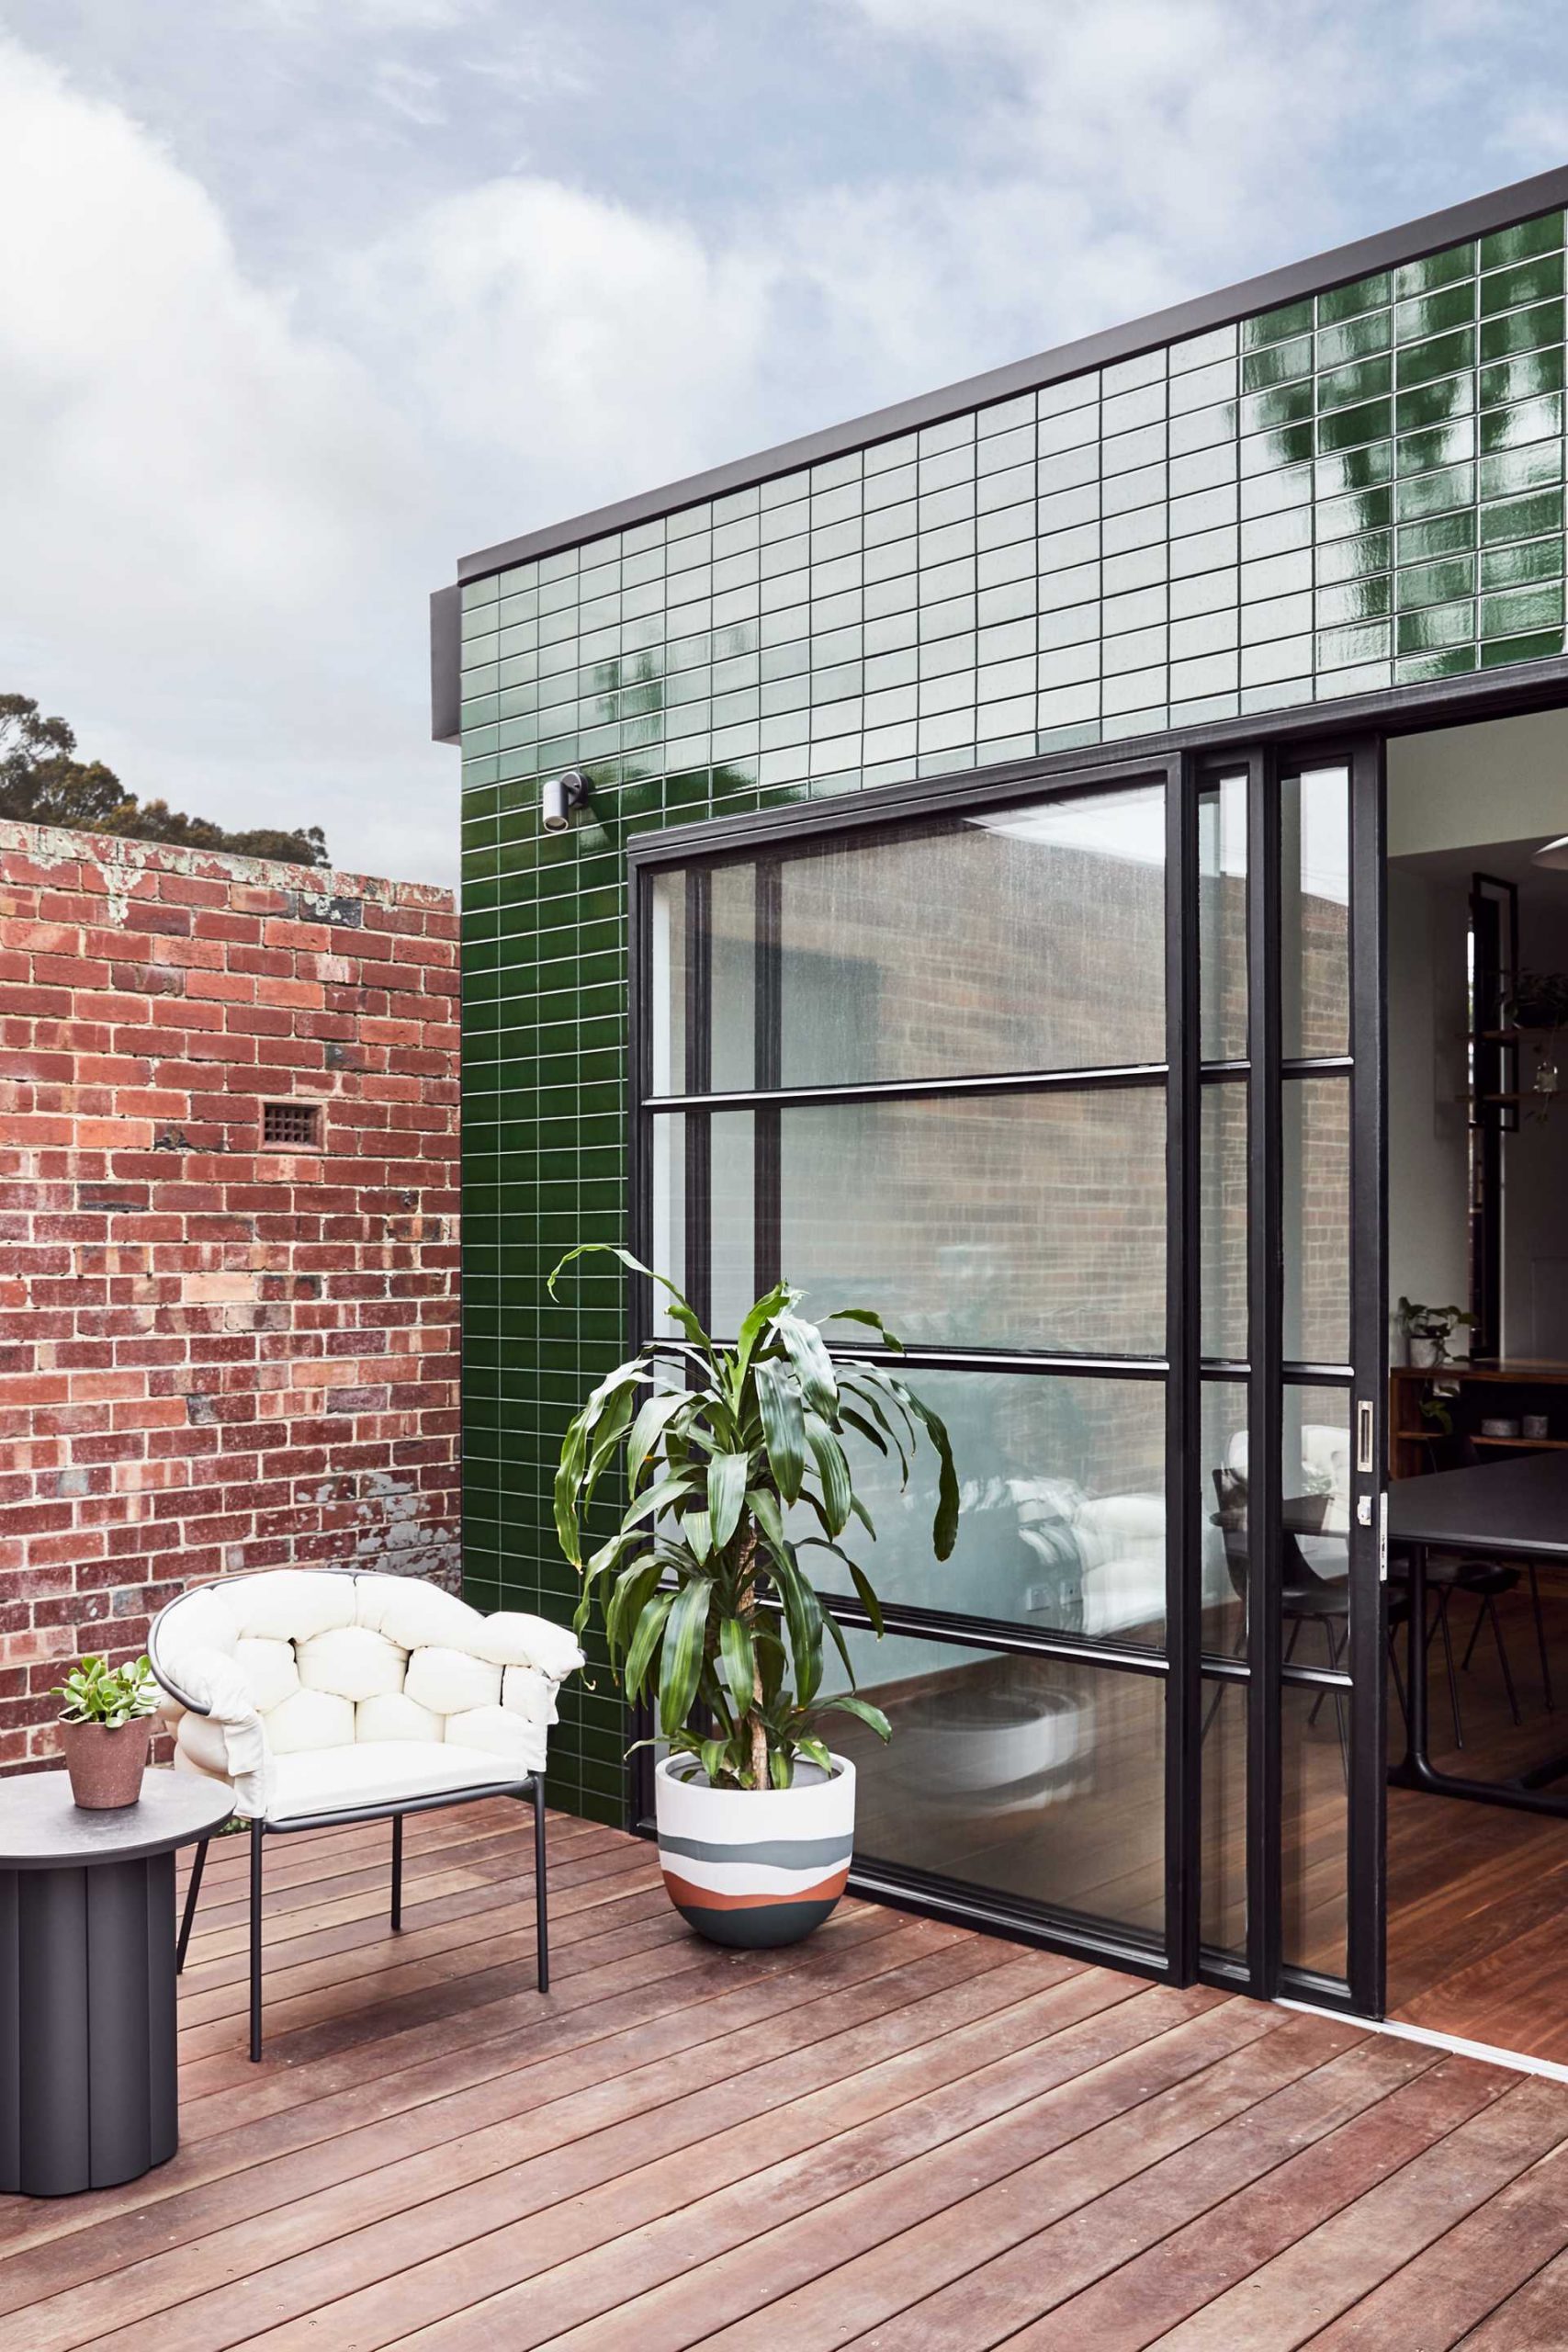 A modern house extension with glazed green tiles and black steel framed sliding glass door.